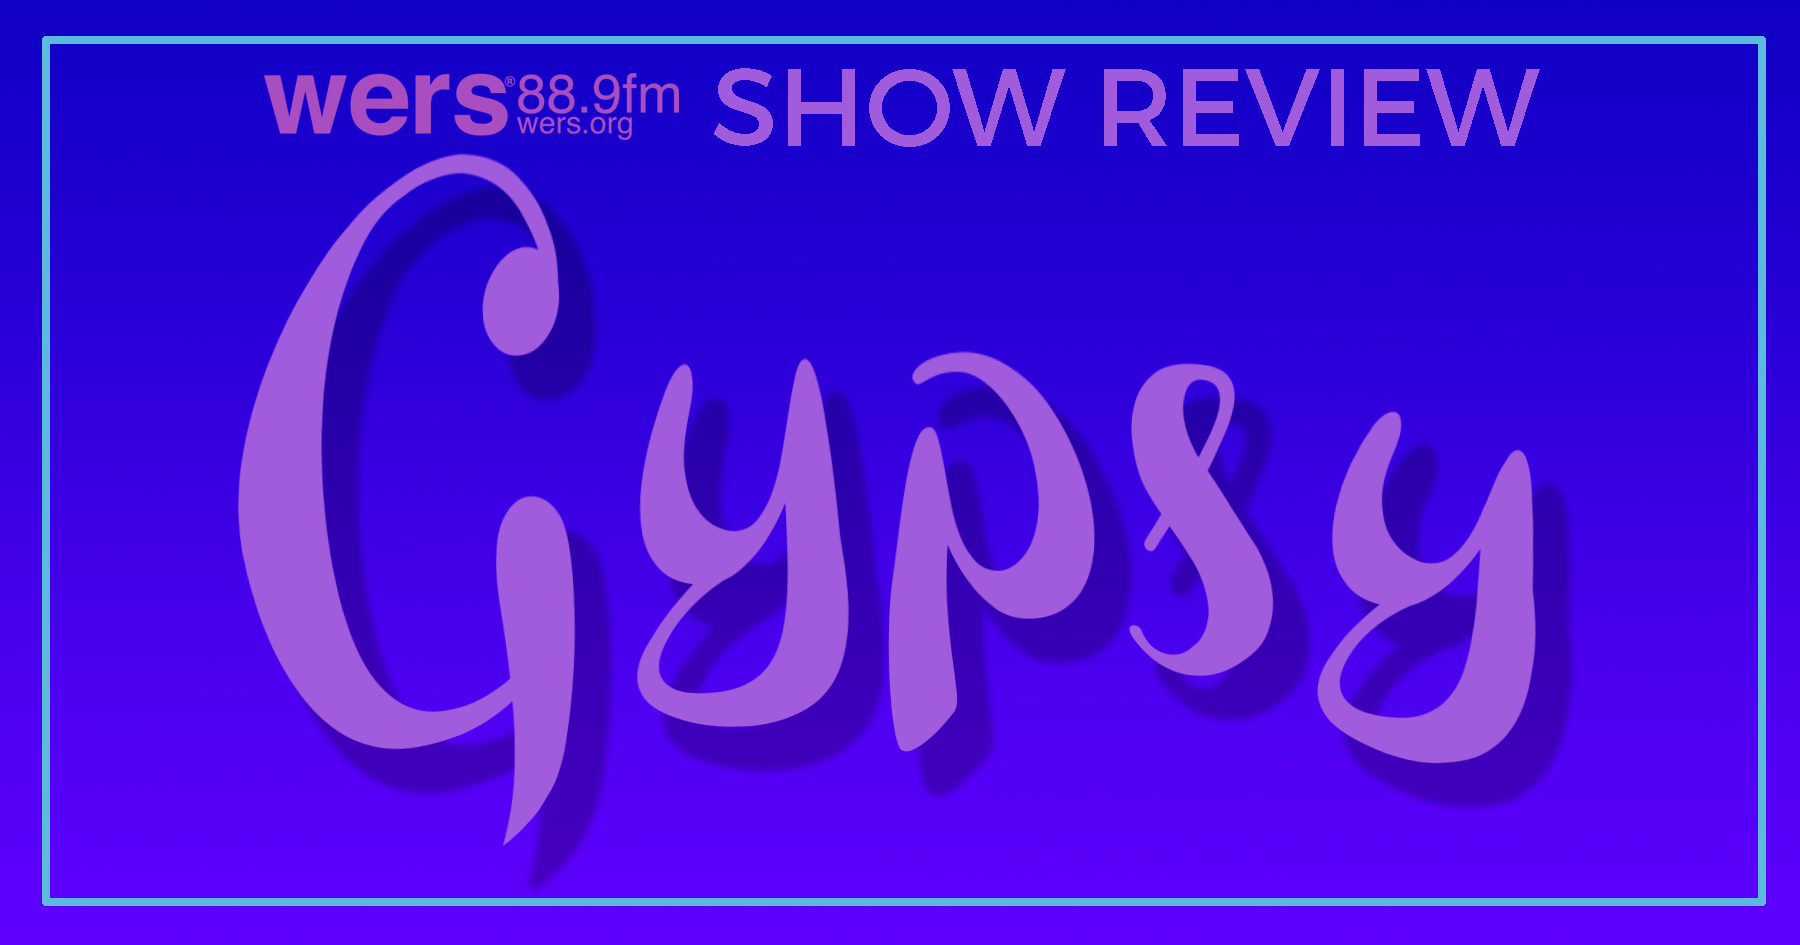 WERS Show Review Gypsy - Banner 